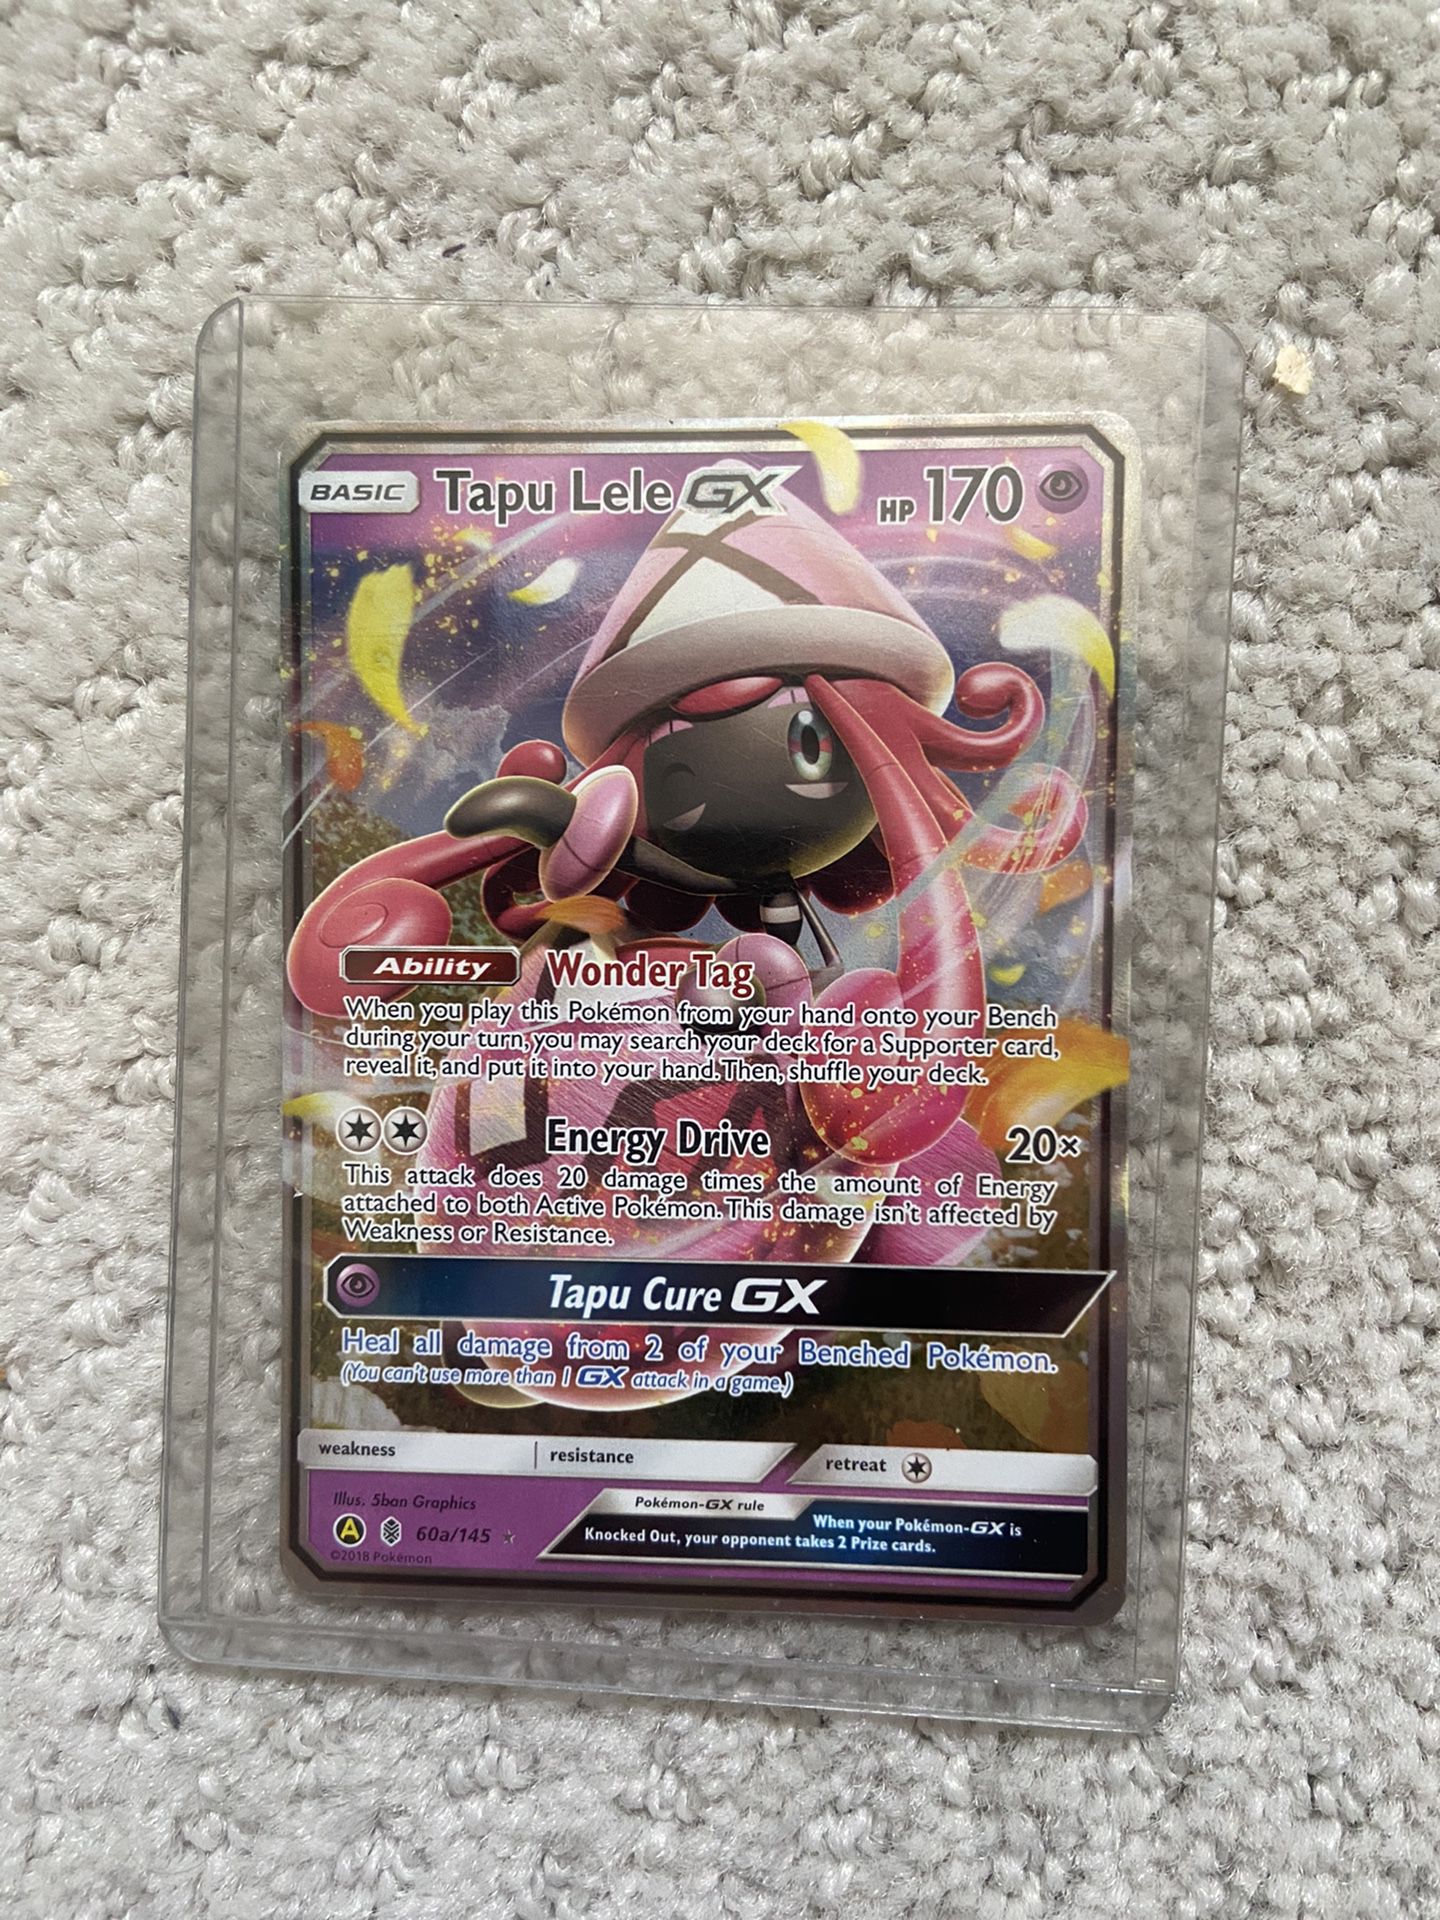 Tapu Lele GX 70a/145 for CHEAPPP